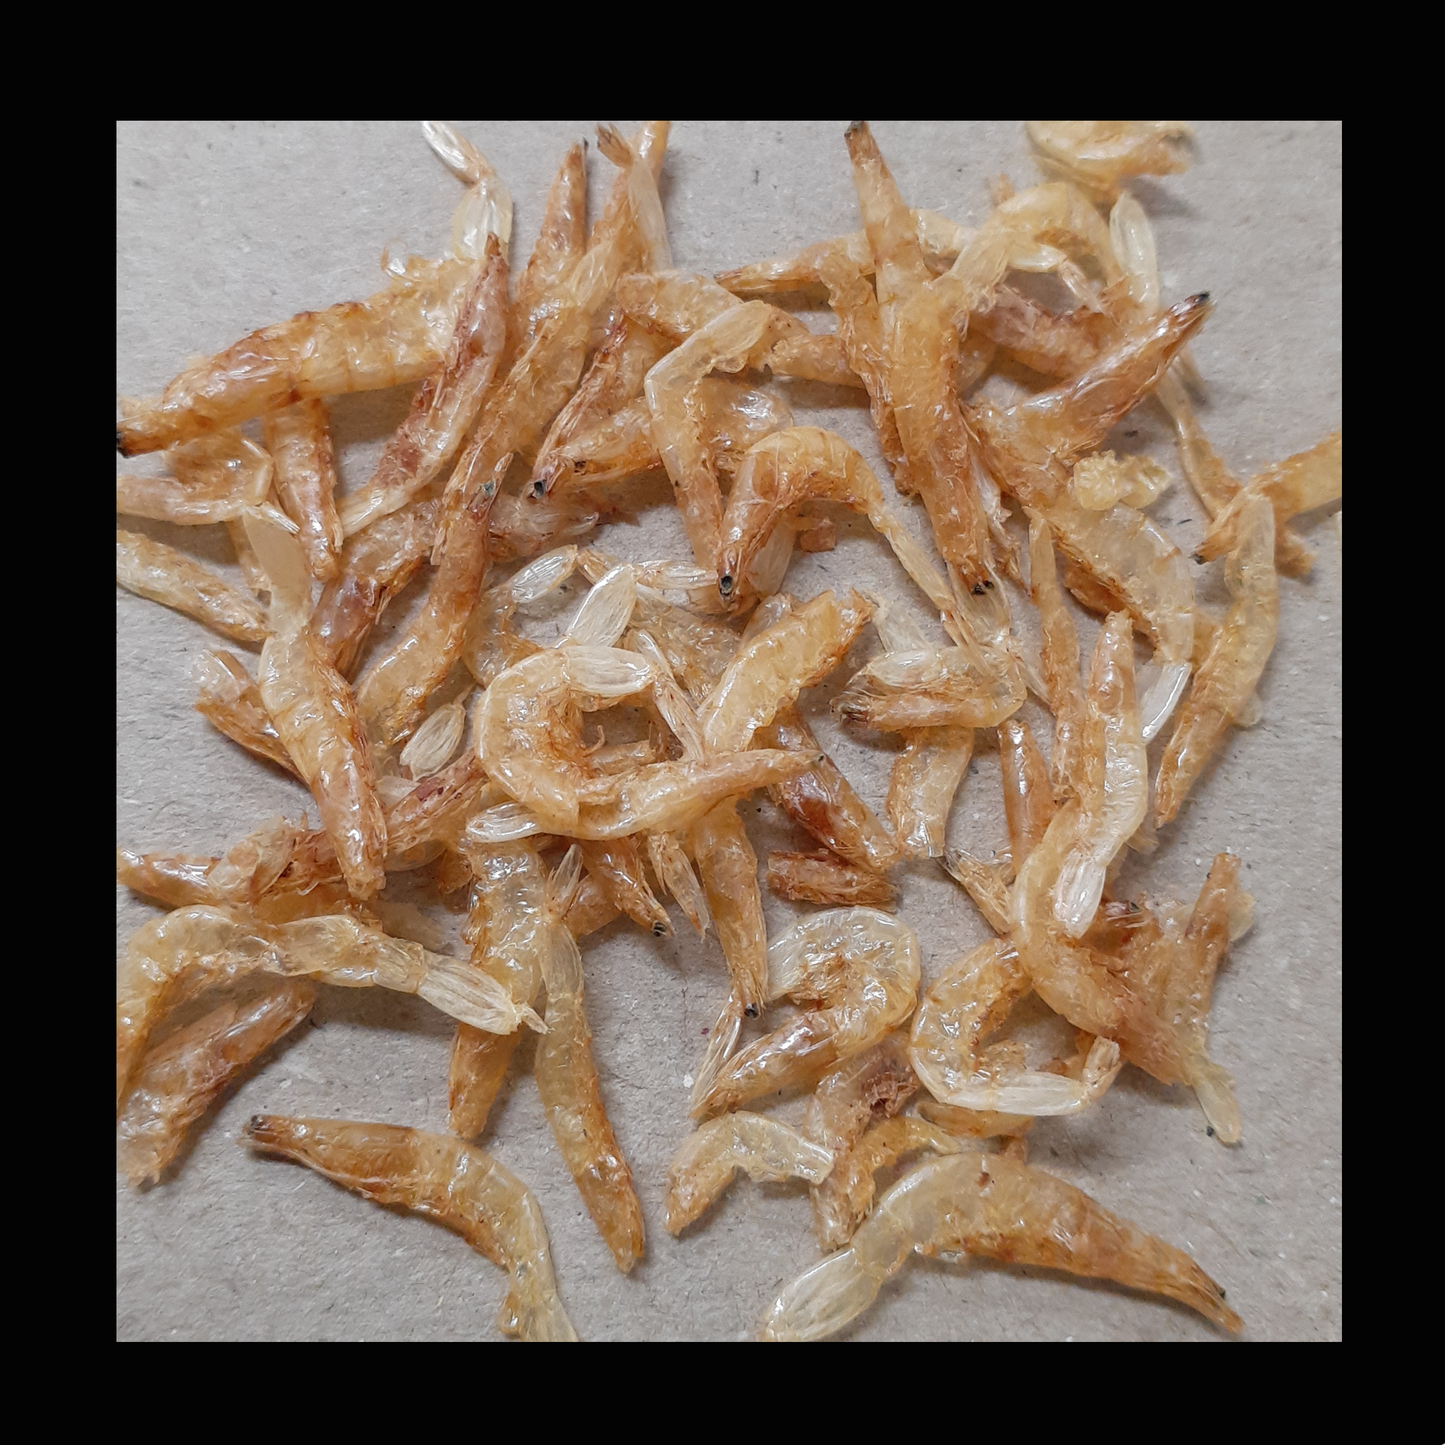 Whole Dried Shrimp 30g High Protein Fish Food